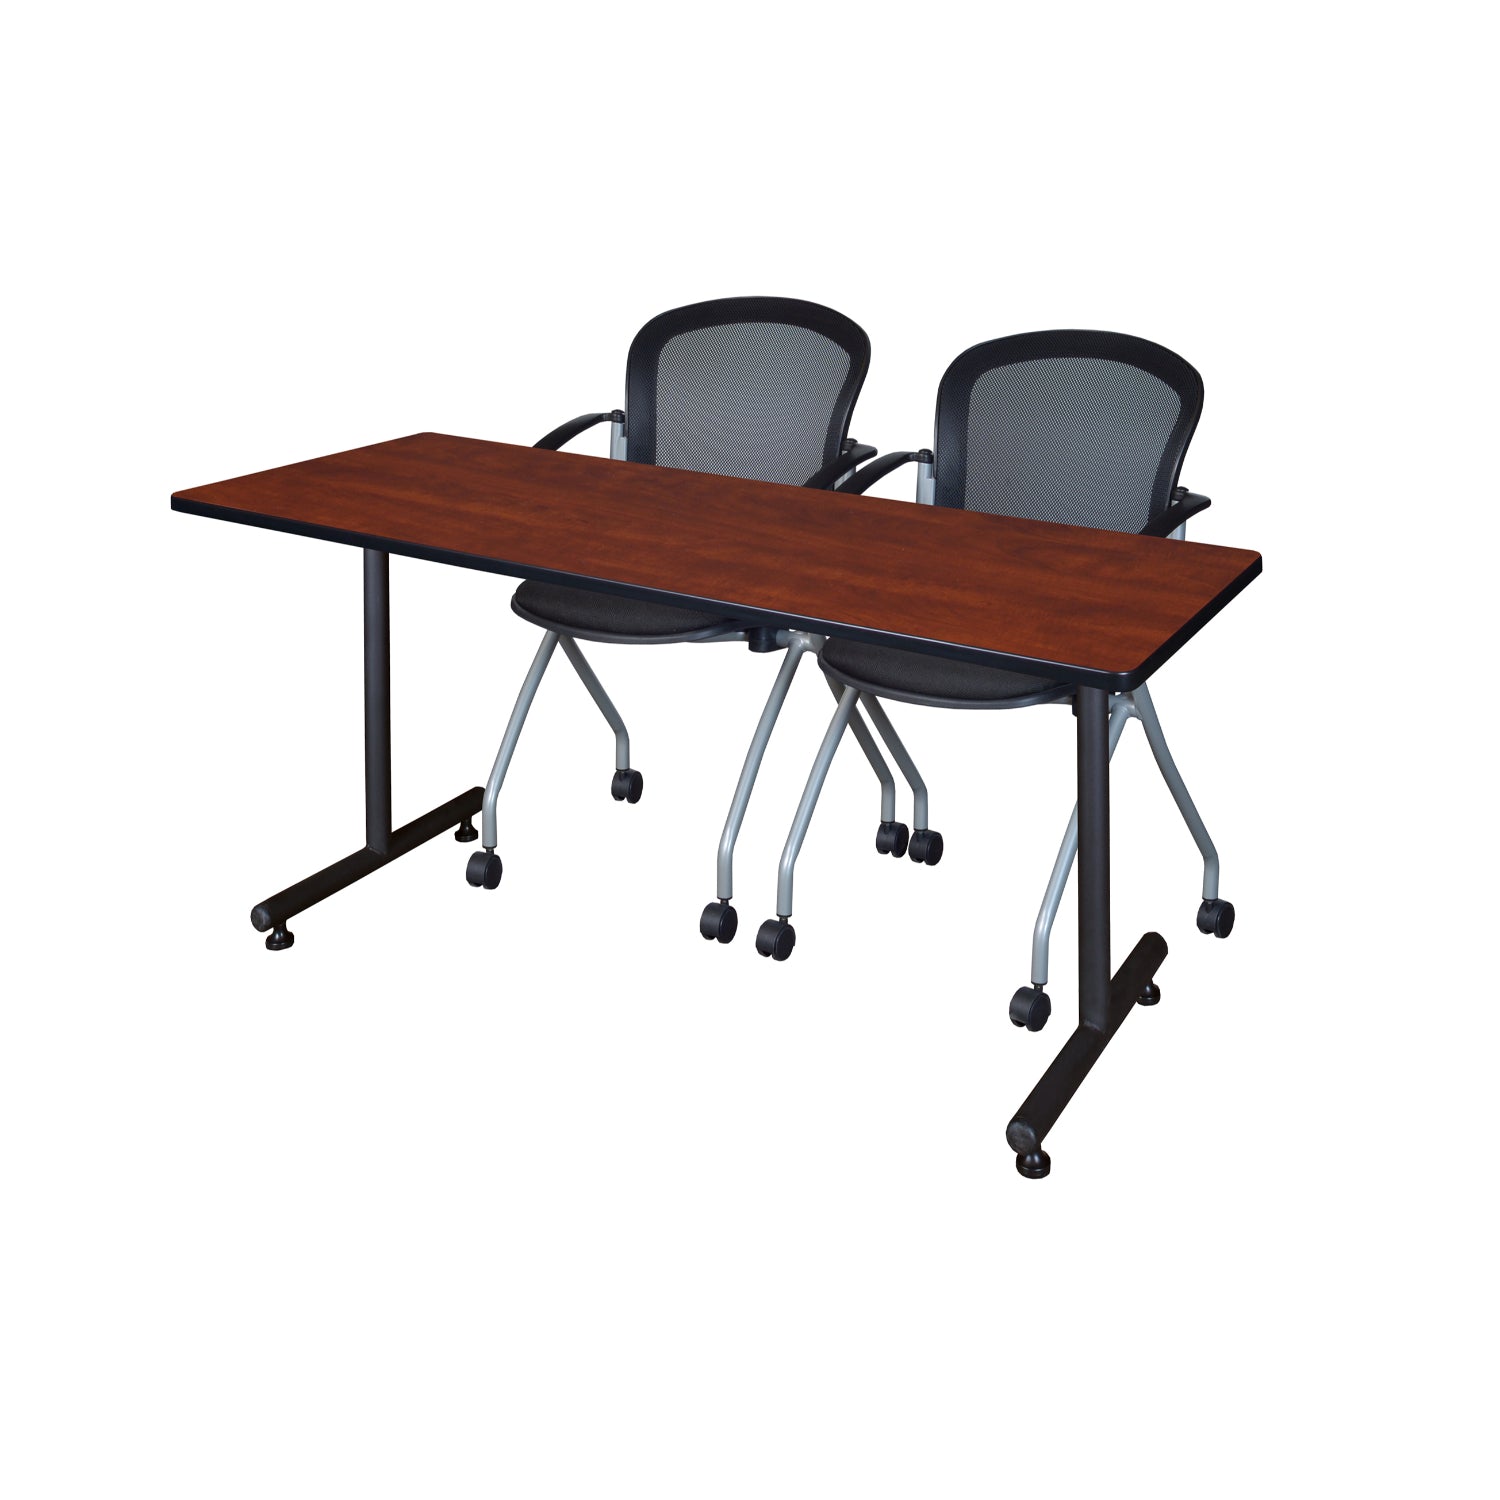 Kobe Training Table and Chair Package, Kobe 72" x 24" T-Base Training/Seminar Table with 2 Cadence Nesting Chairs